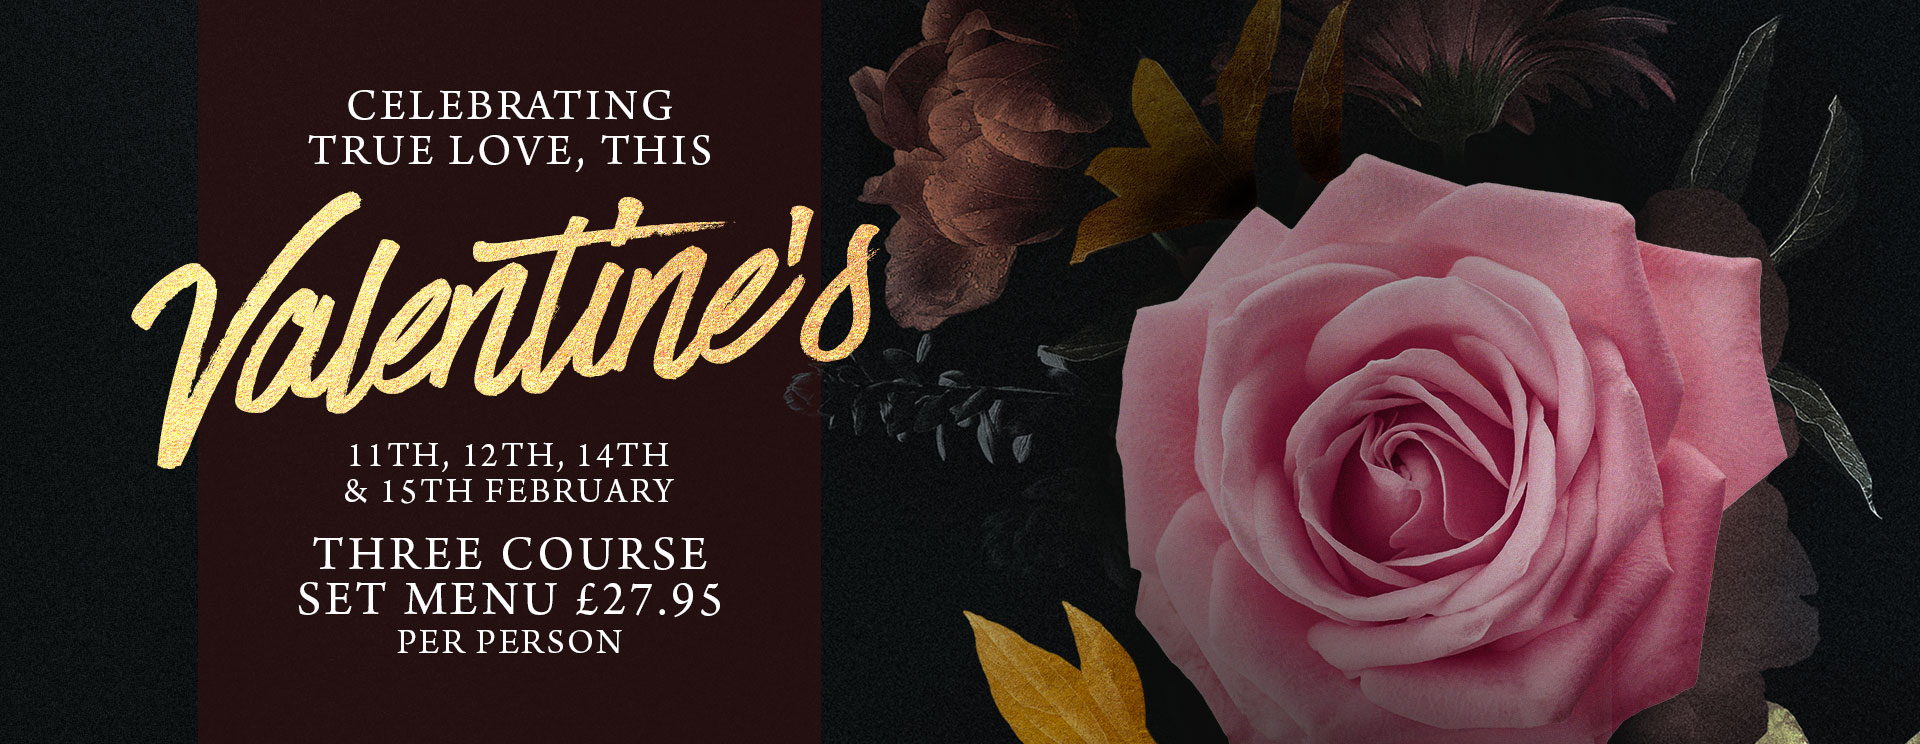 Valentines at The Black Horse